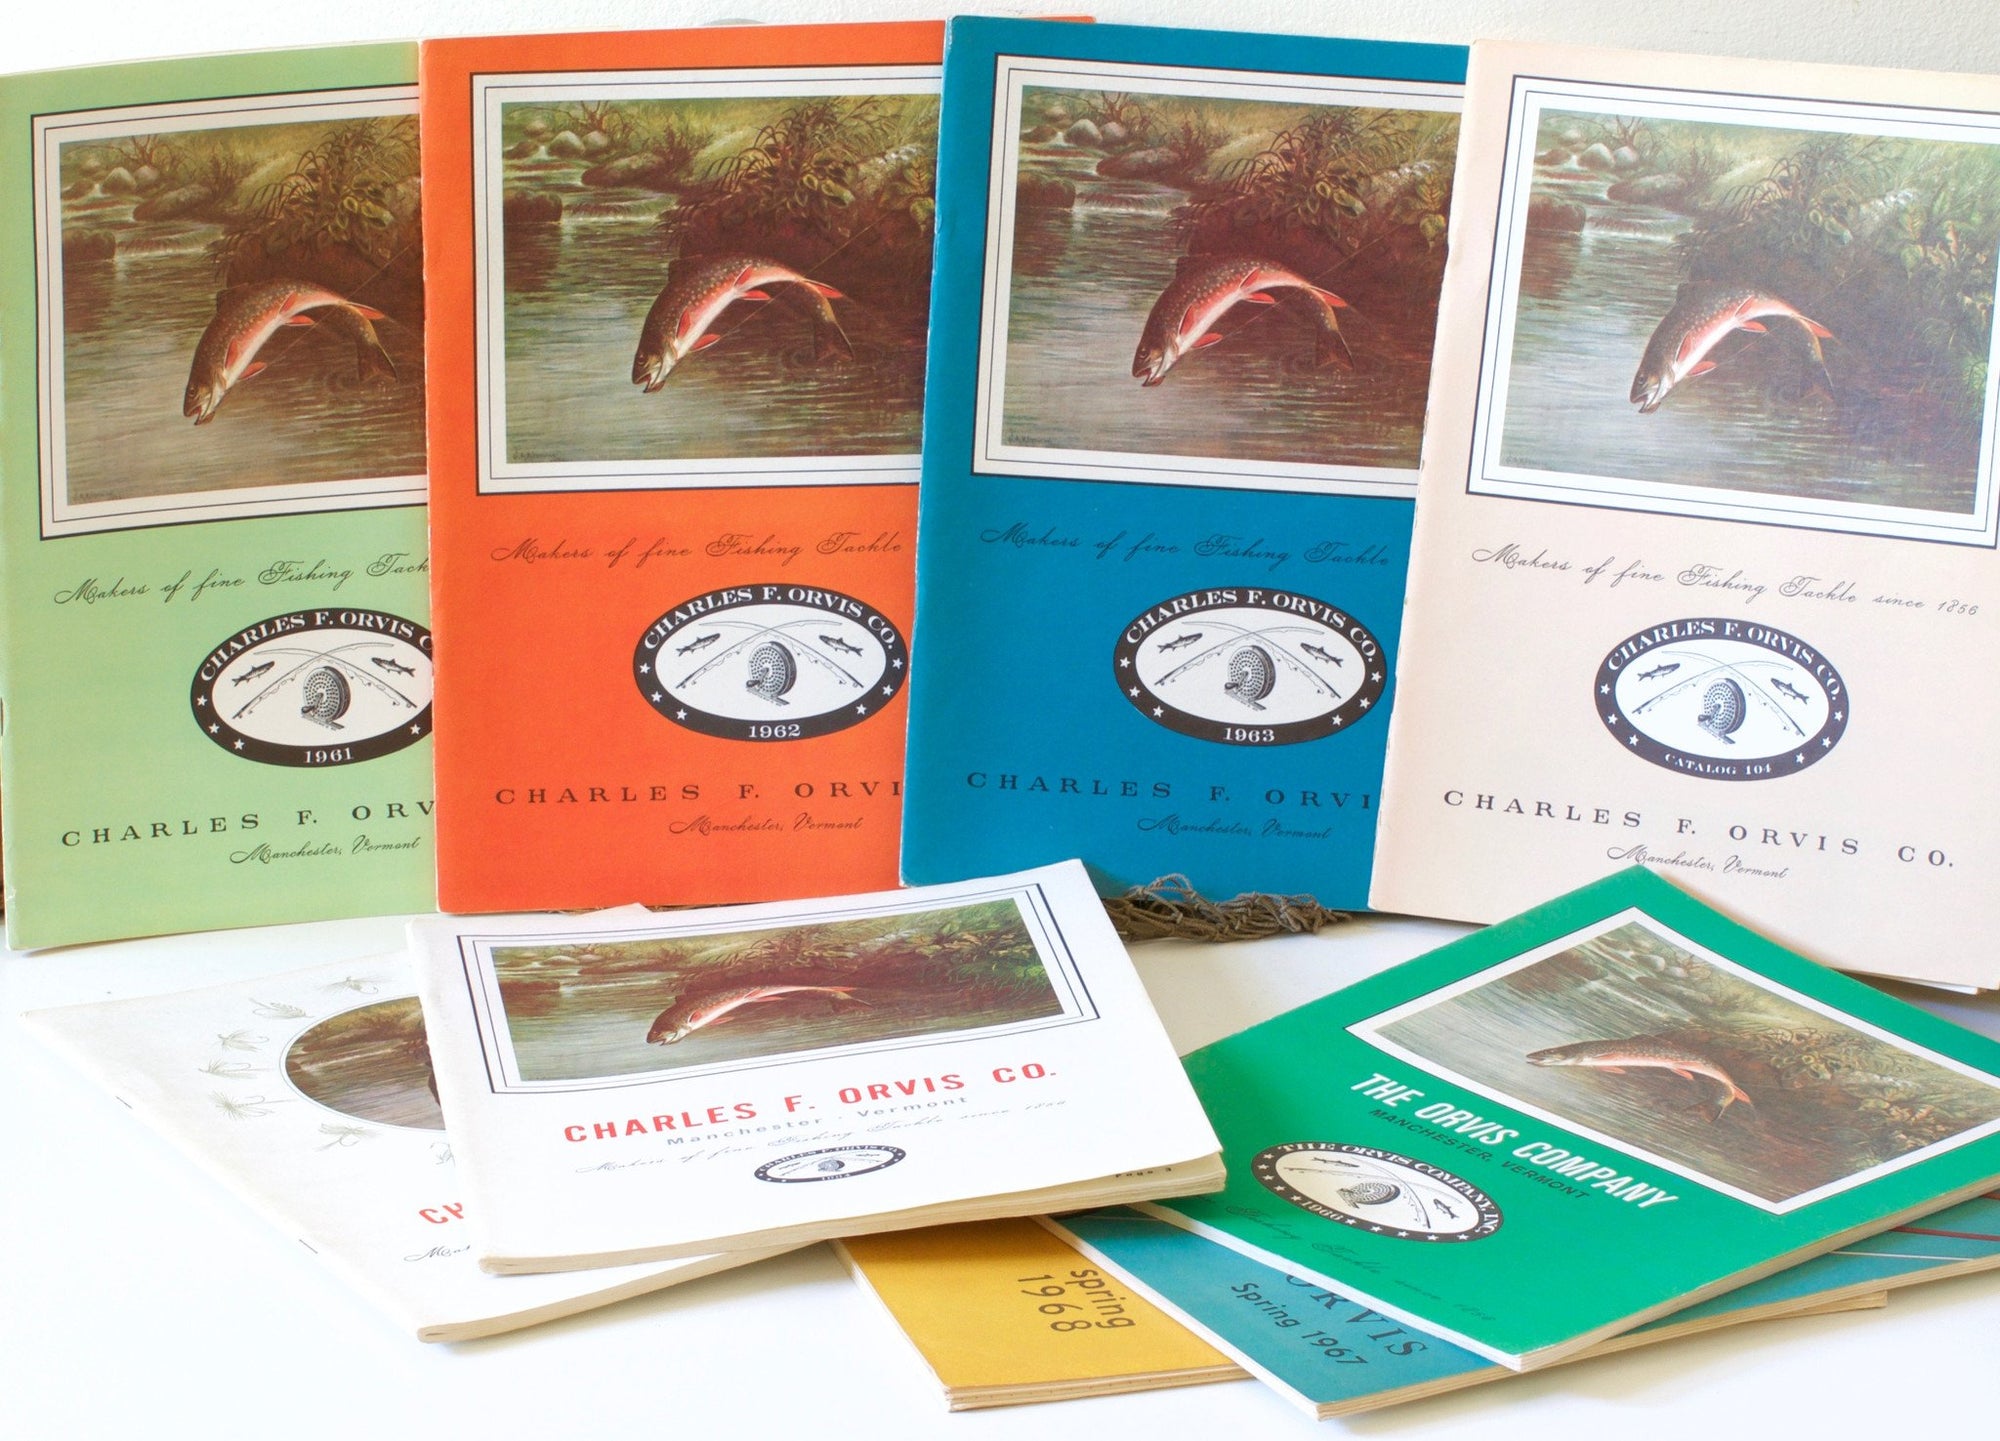 Orvis Fishing Tackle Catalogs - Complete Set from the 1960s